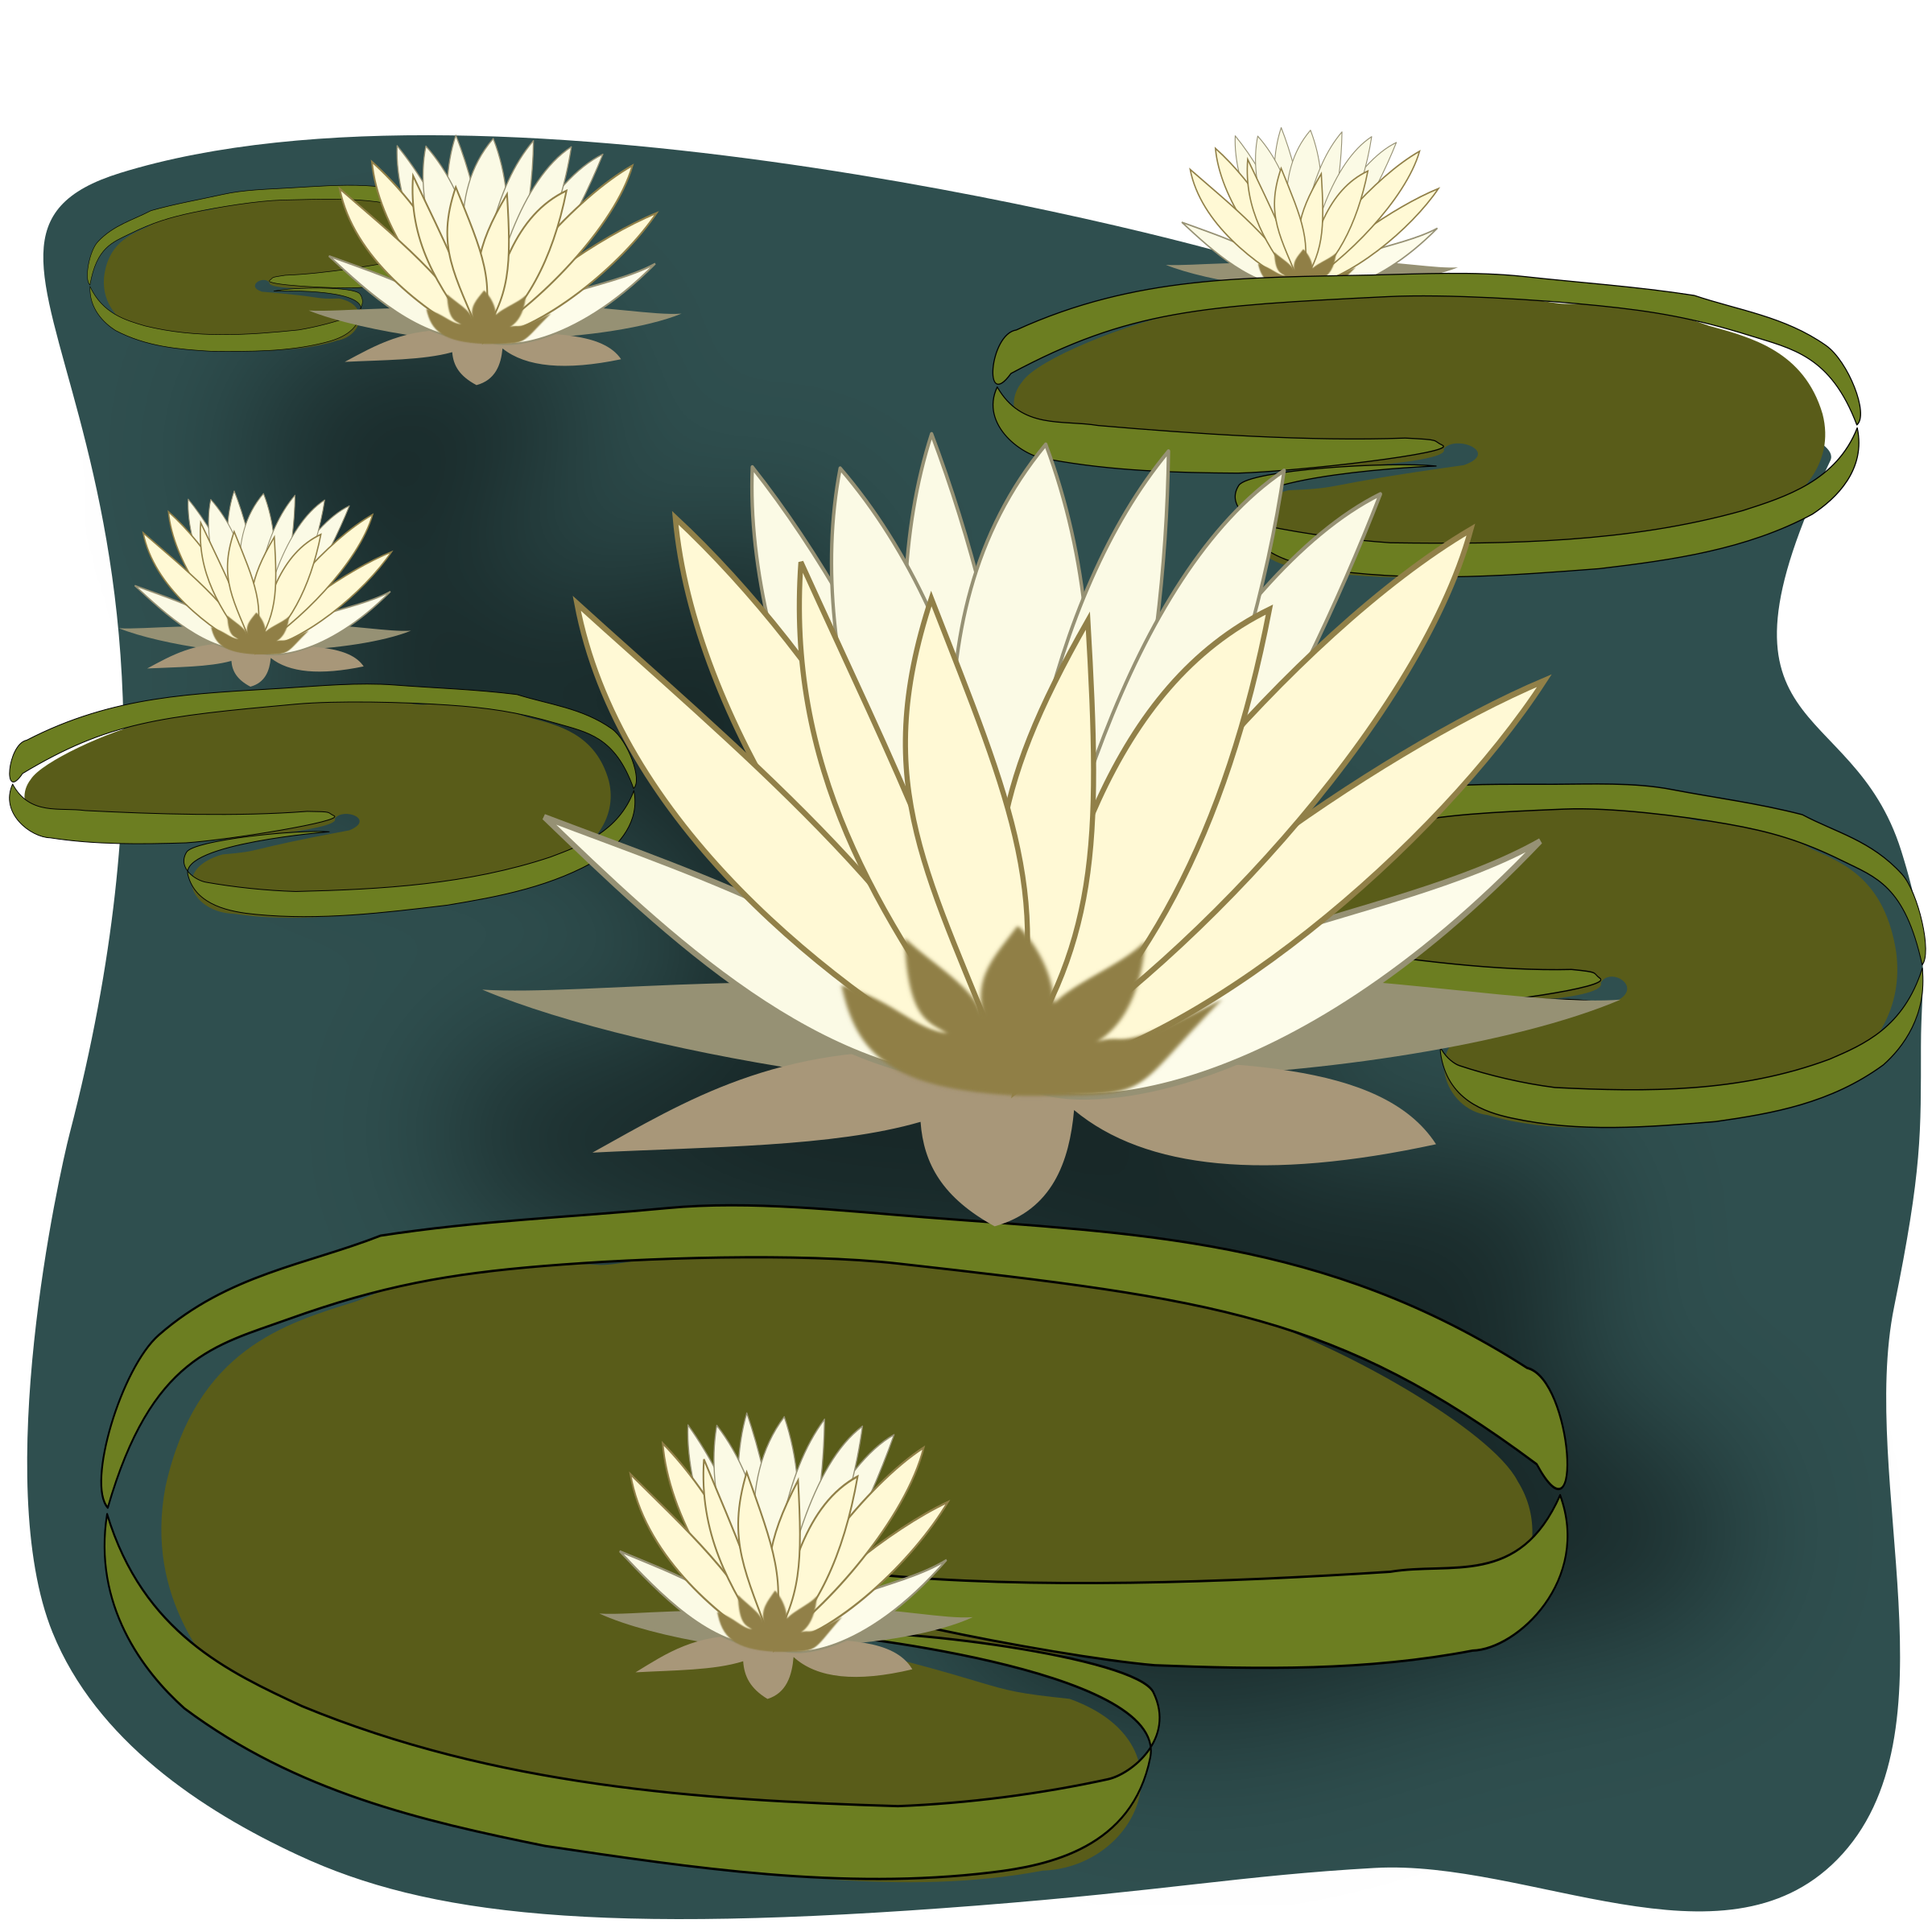 landscaping clipart pond reed